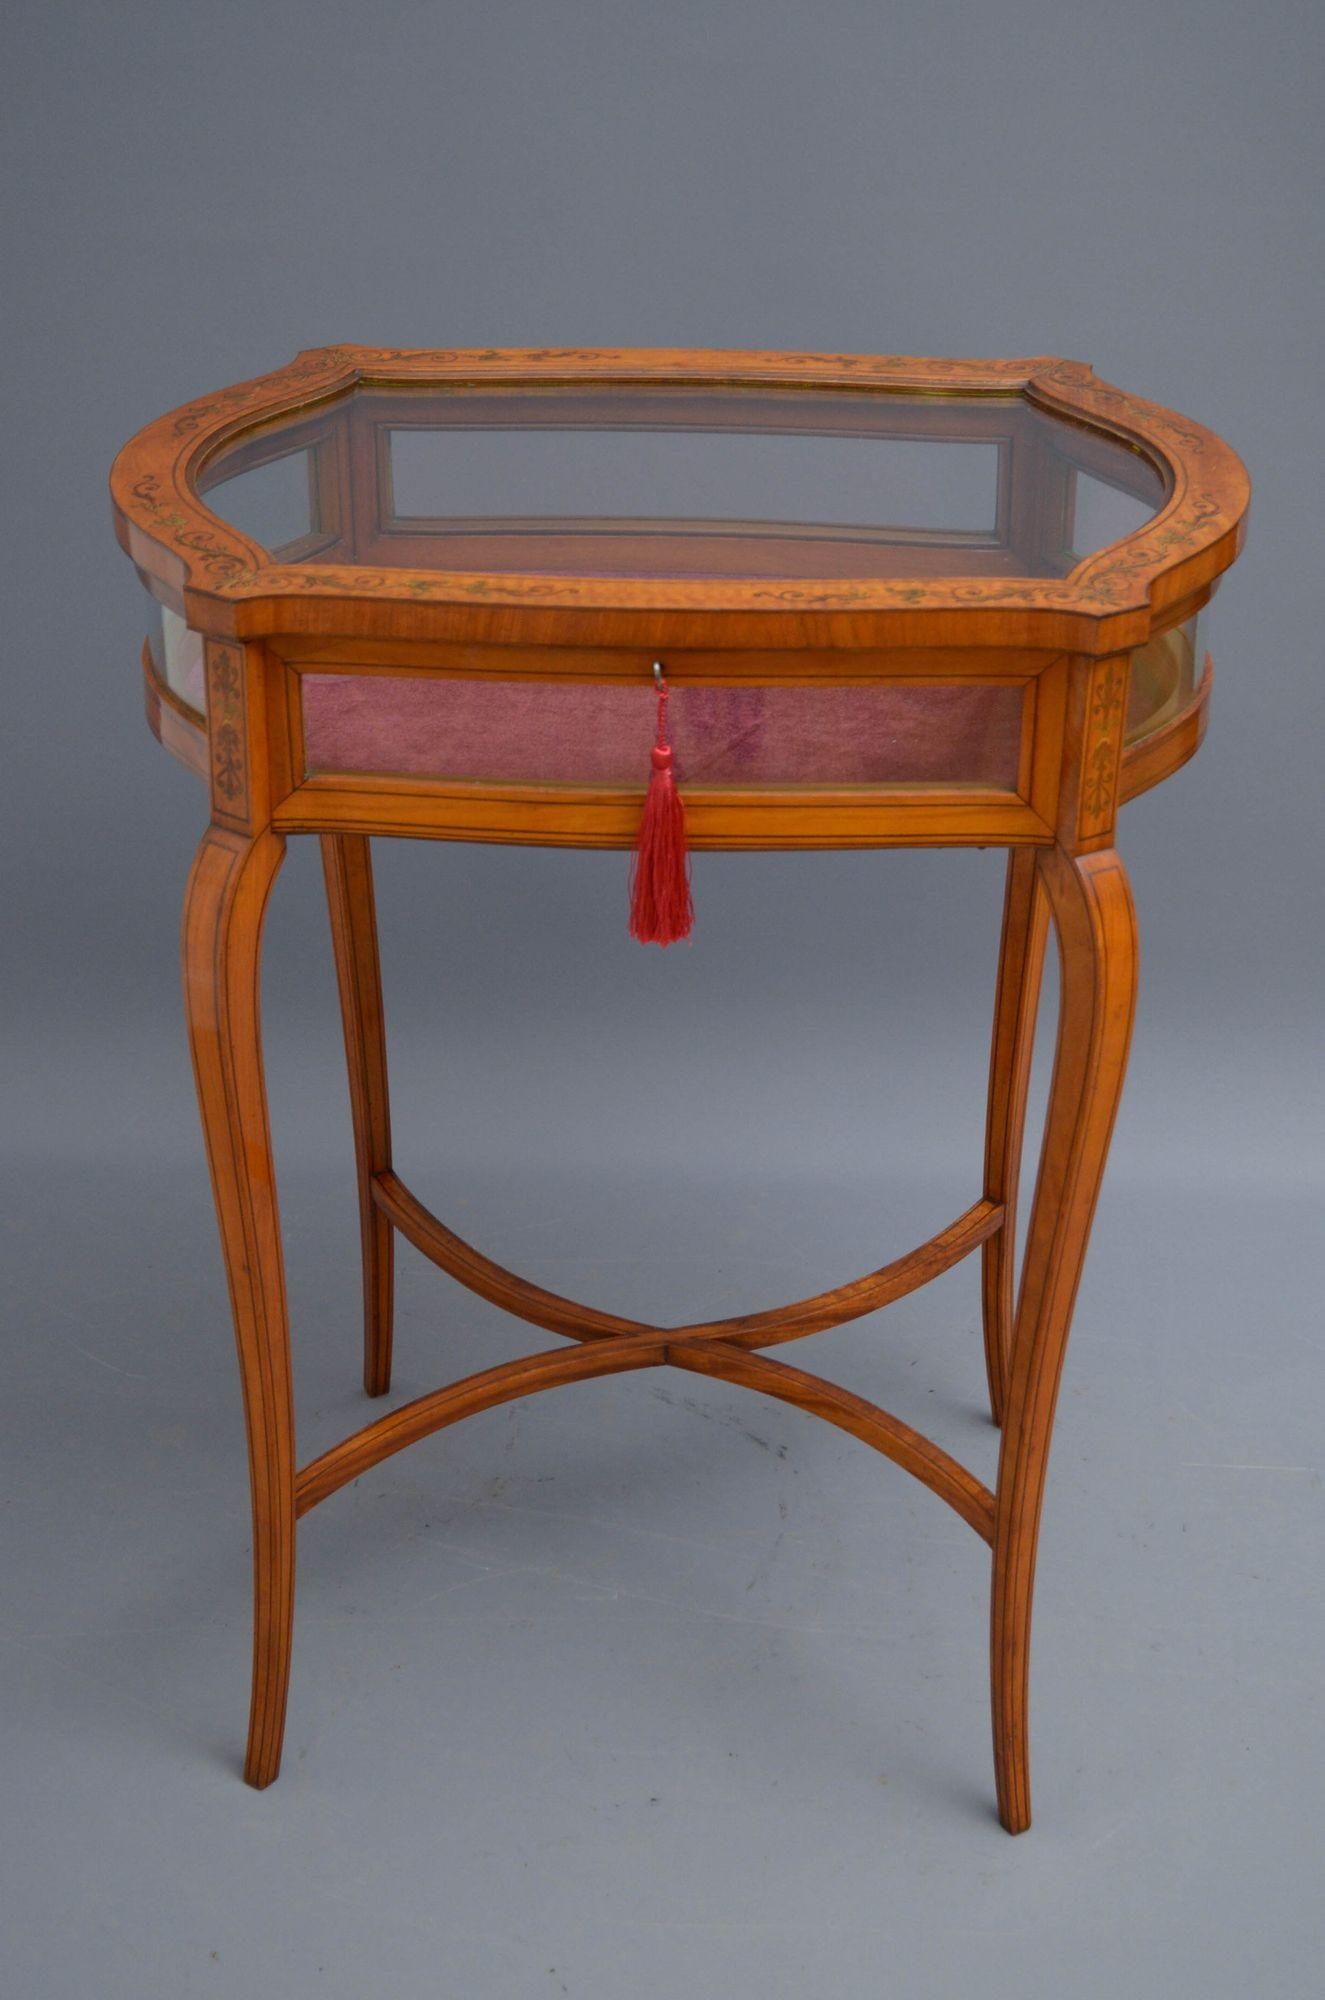 Sn5462 Outstanding Edwardian satinwood display table of serpentine outline, having glazed, finely inlaid lift up top fitted with original working lock, key and original hinges, enclosing newly relined interior above four glazed sides and string